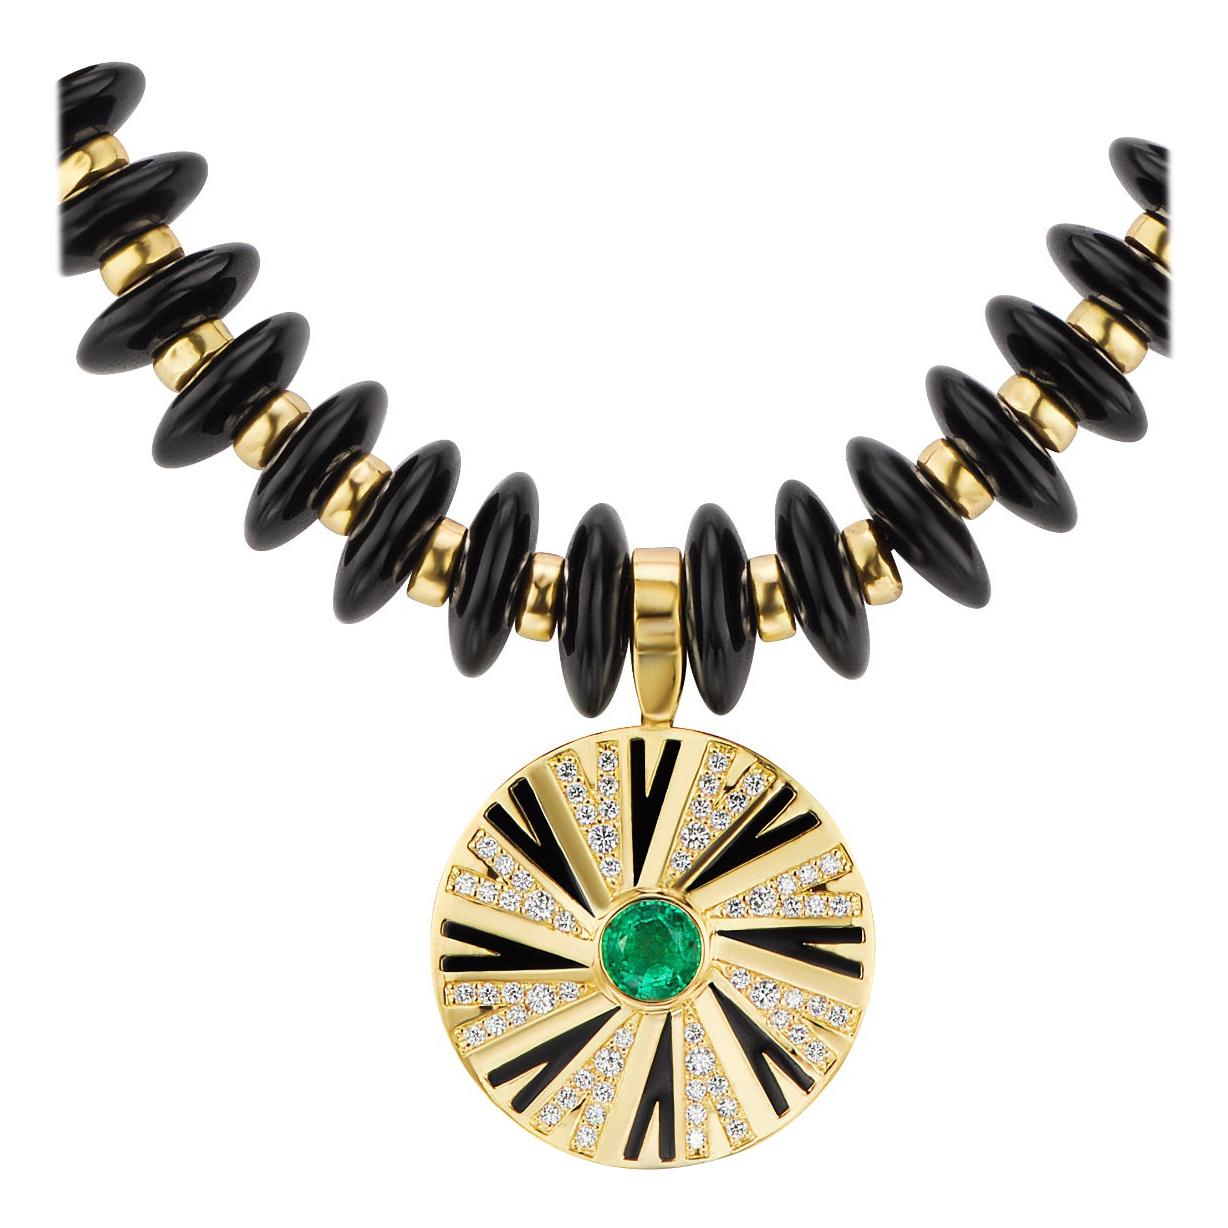 Emerald and Diamonds Pendant on Onyx and Gold Necklace